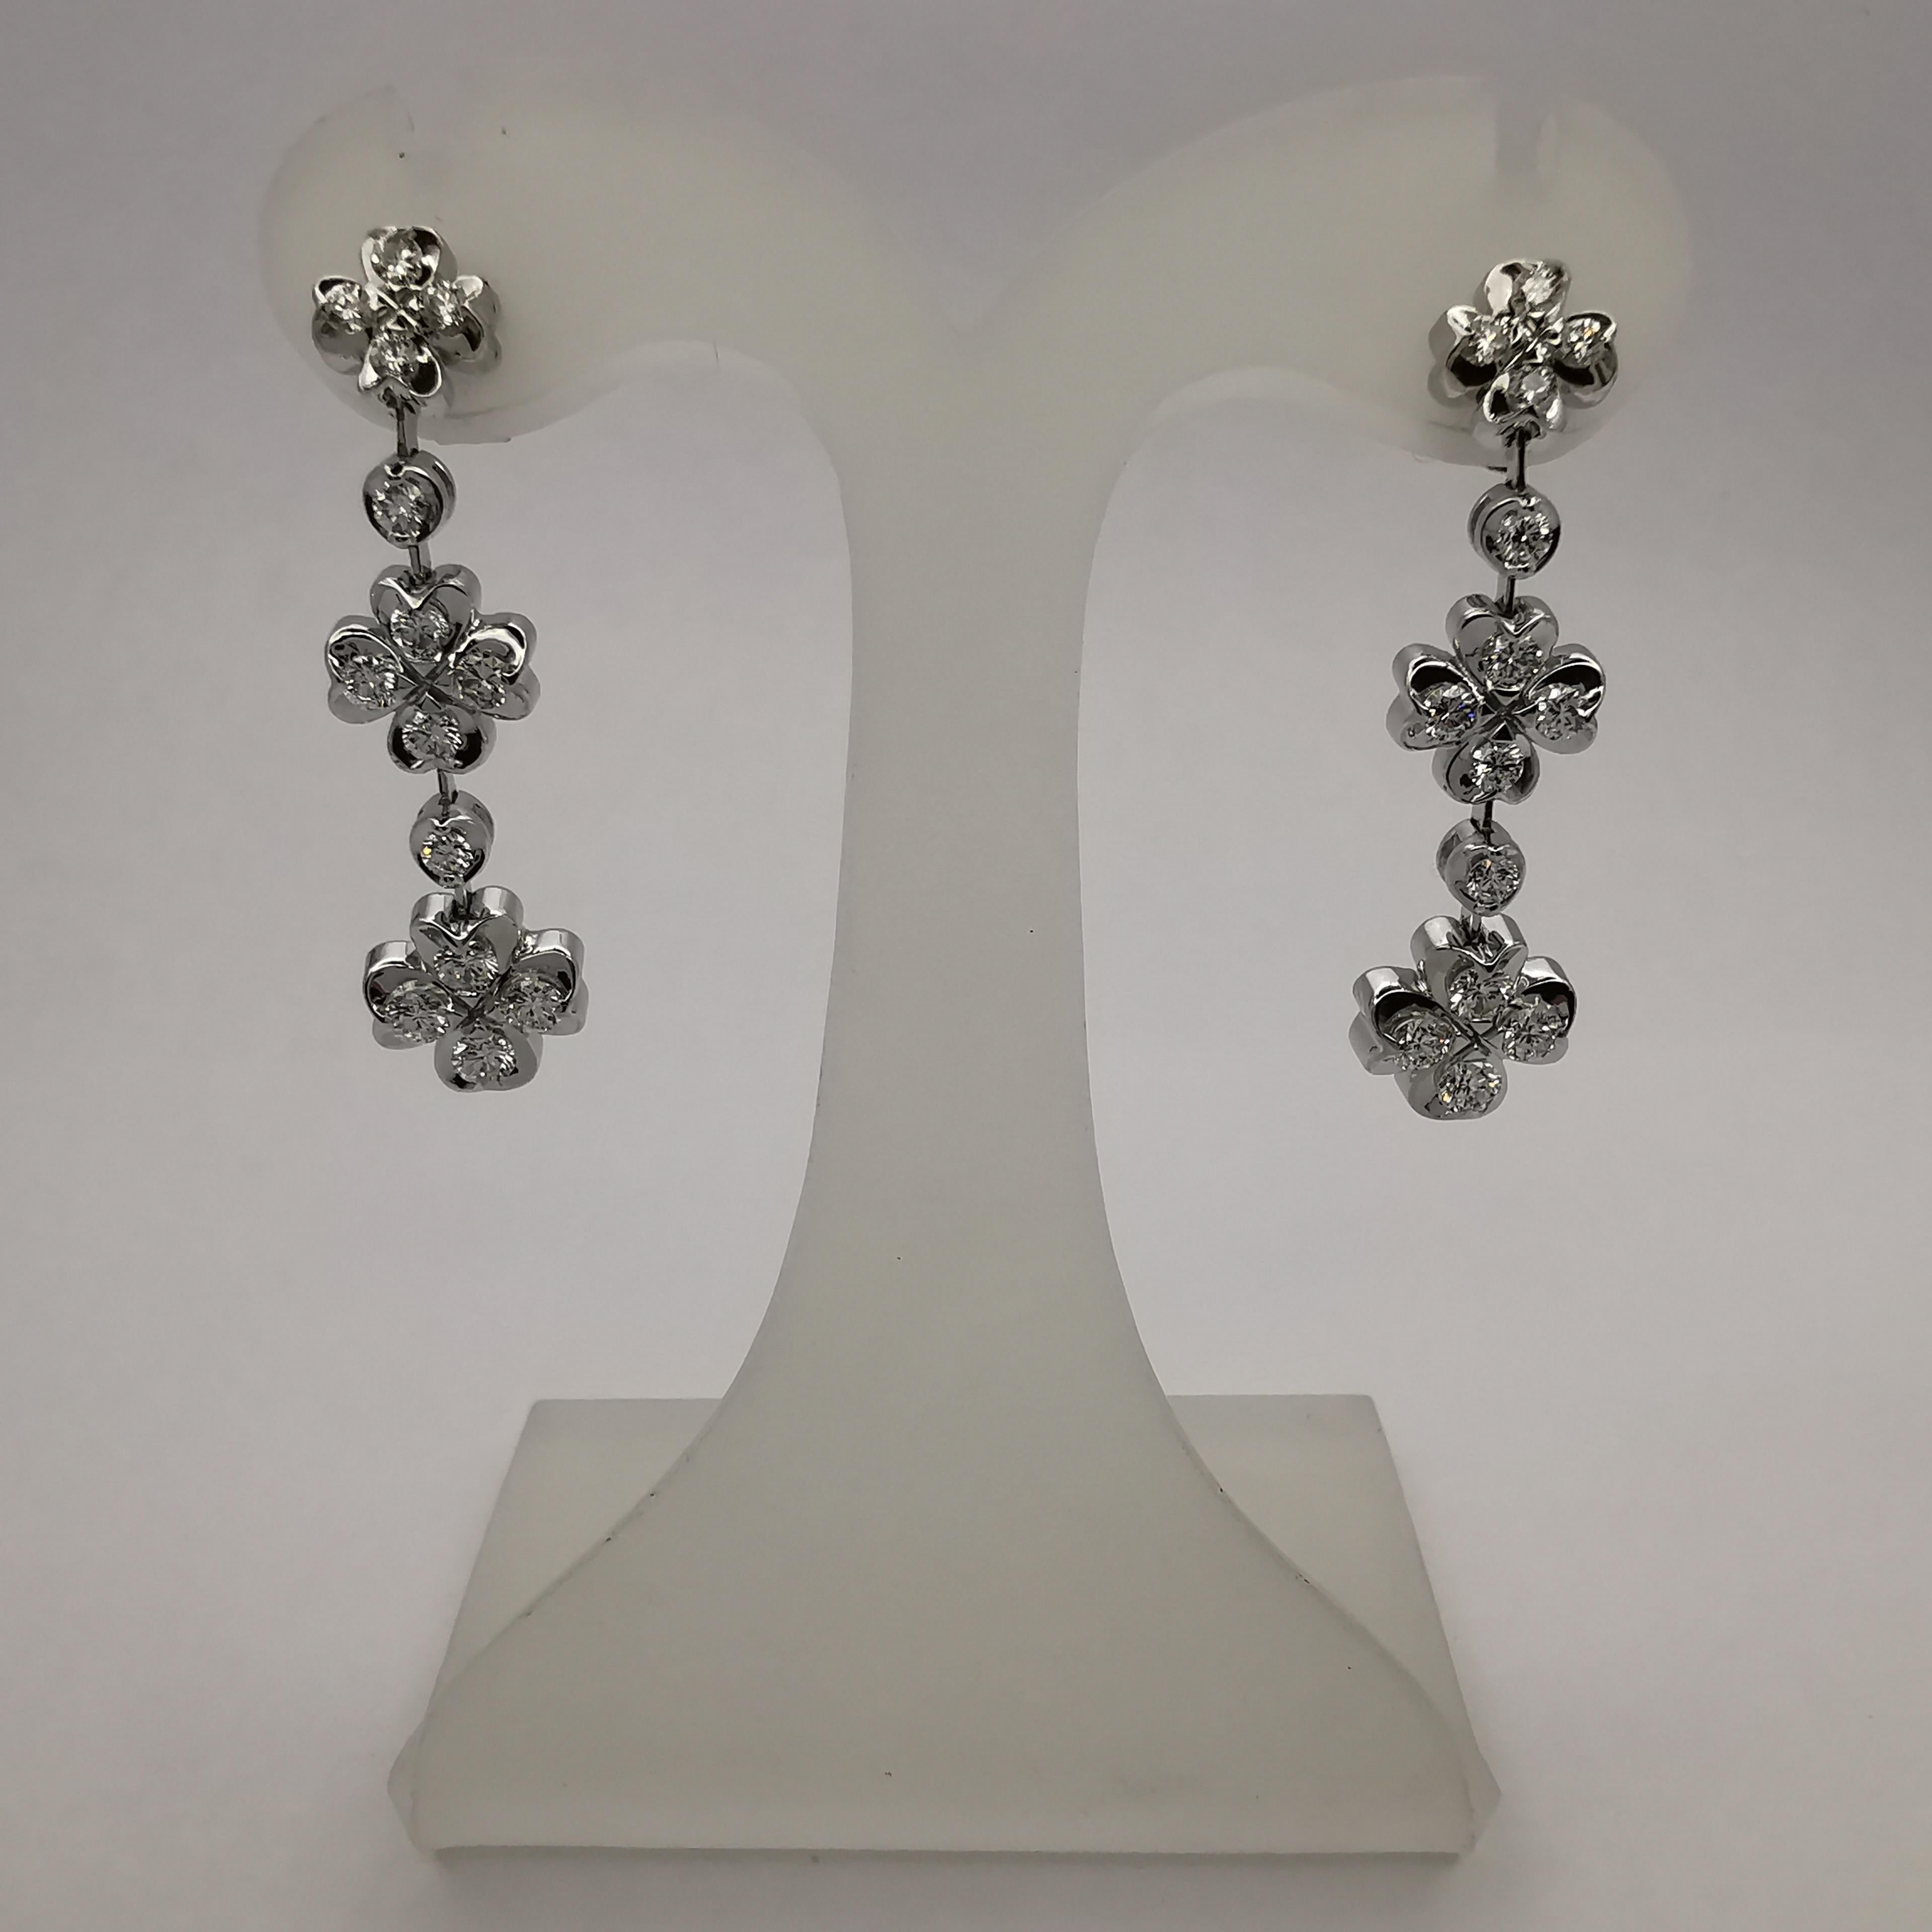 These stunning dangle earrings are the perfect choice for everyday wear. The triple four-leaf clover design is set with 1 carat of 28 diamonds, adding a touch of sparkle and shine to your everyday outfits. The earrings are made of 18K white gold and